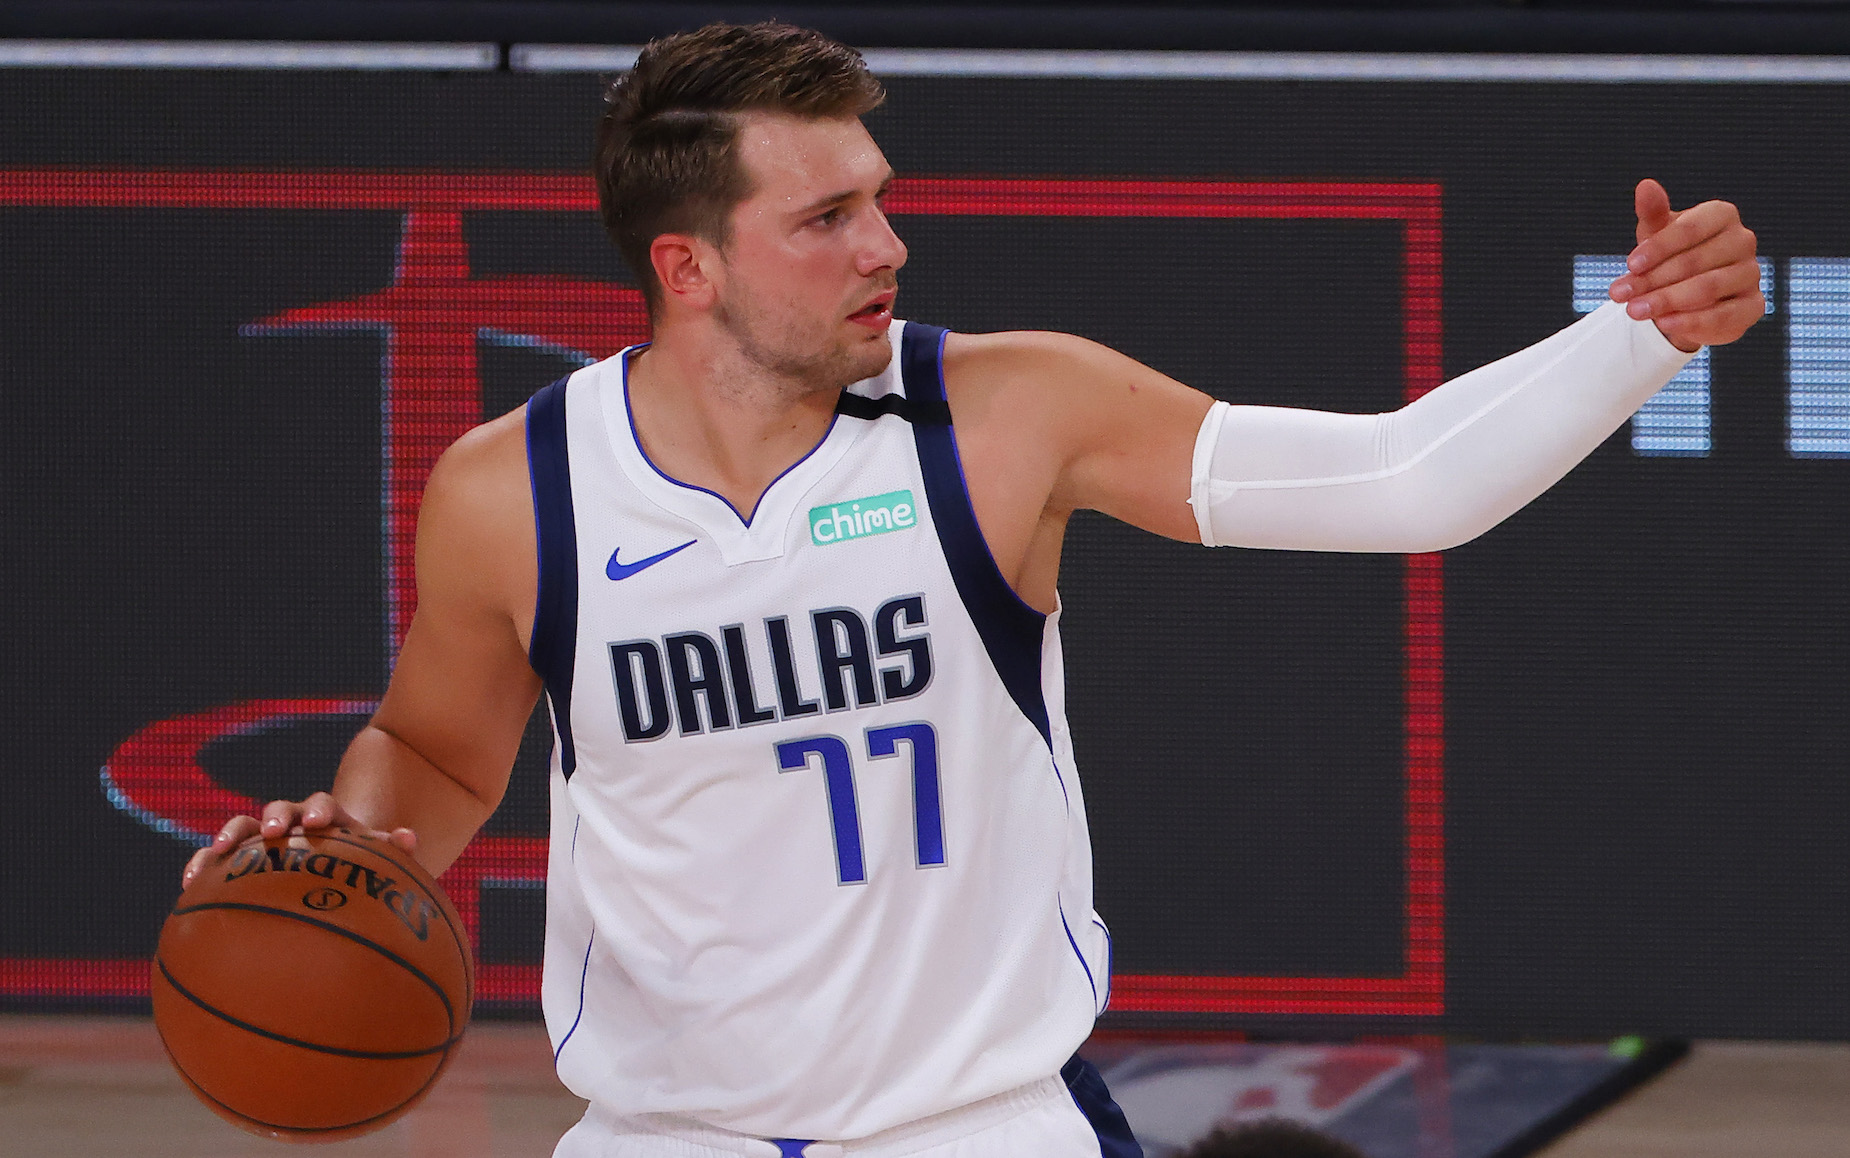 Luka Doncic wasn't too happy after a "terrible" performance in his NBA playoff debut.